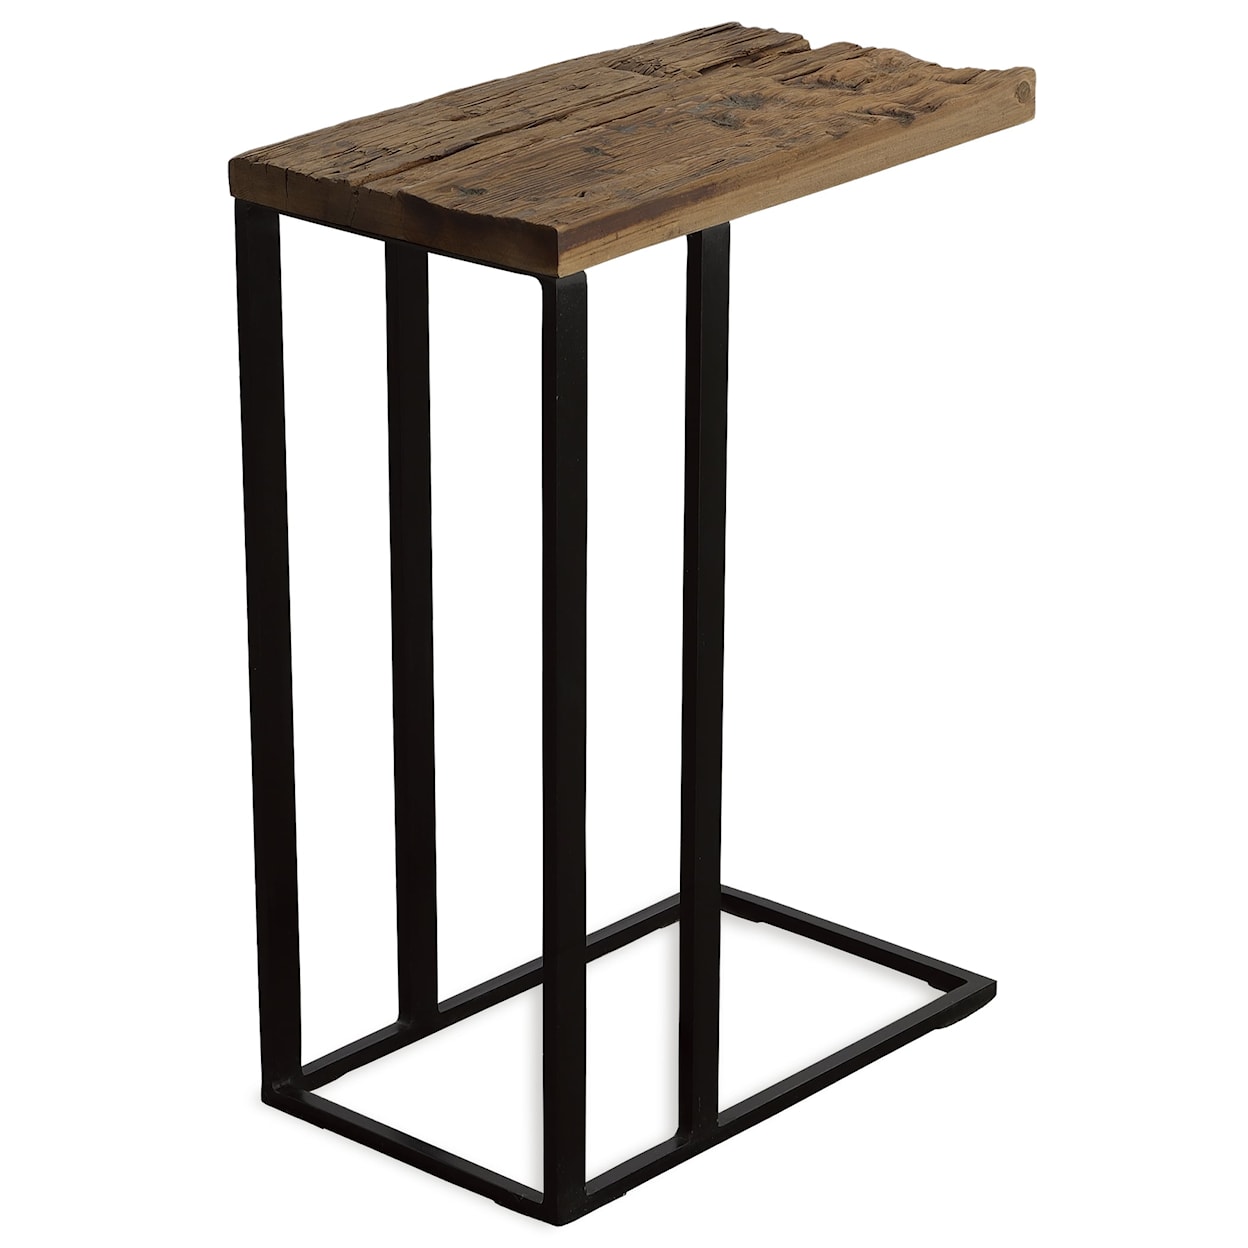 Uttermost Union Union Reclaimed Wood Accent Table